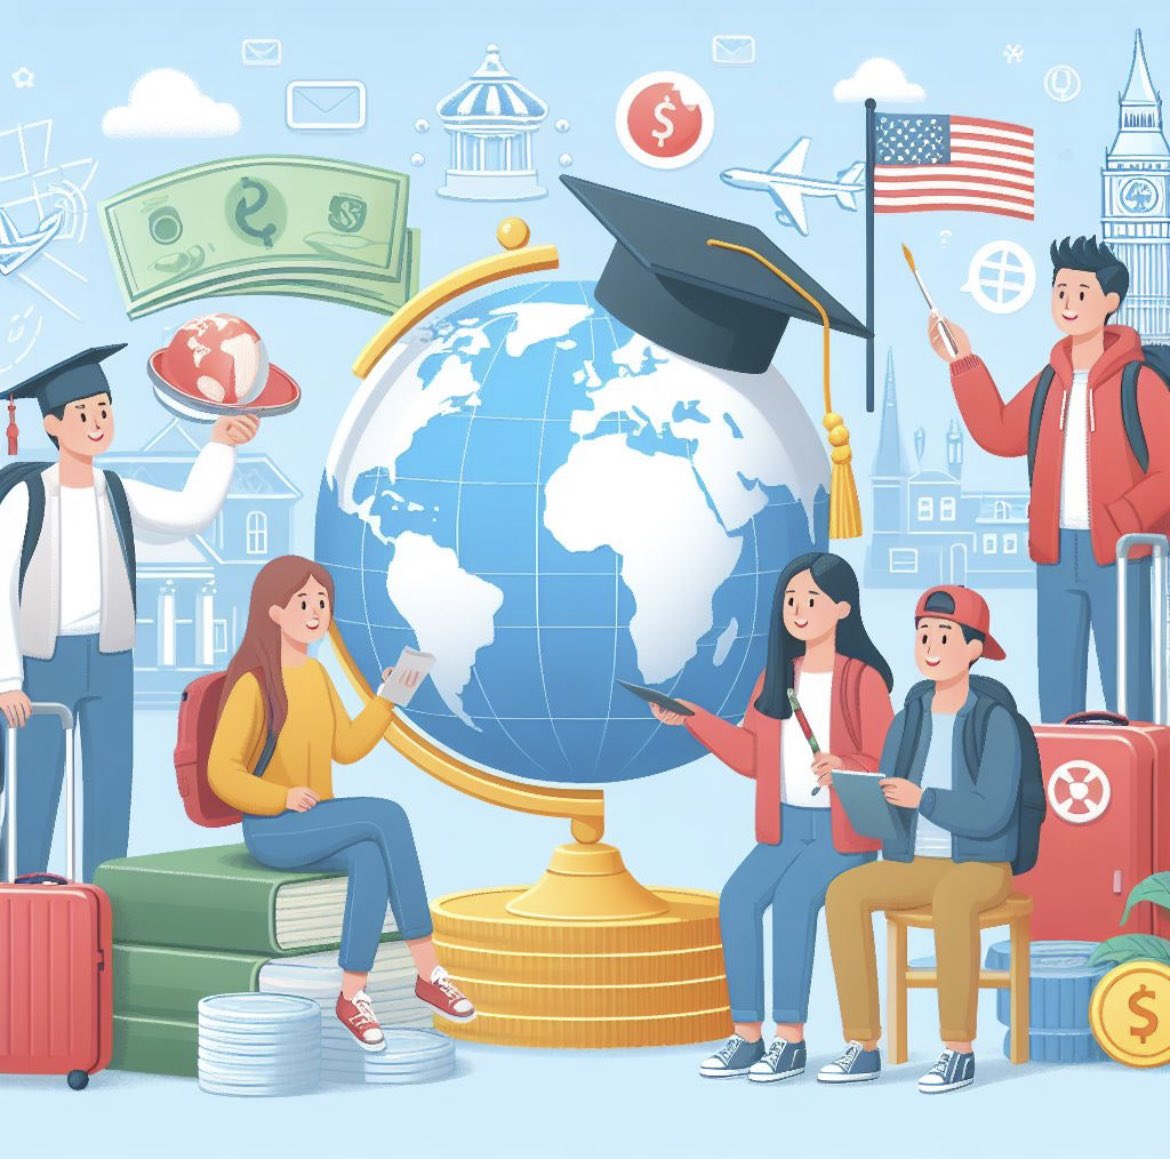 Attn: Prospective International Students  -check out the most recent information for required proof of funds for student visa compared across 20 different destinations - gallery.globelanguage.com/studying-abroa…
#intled #internationalstudent